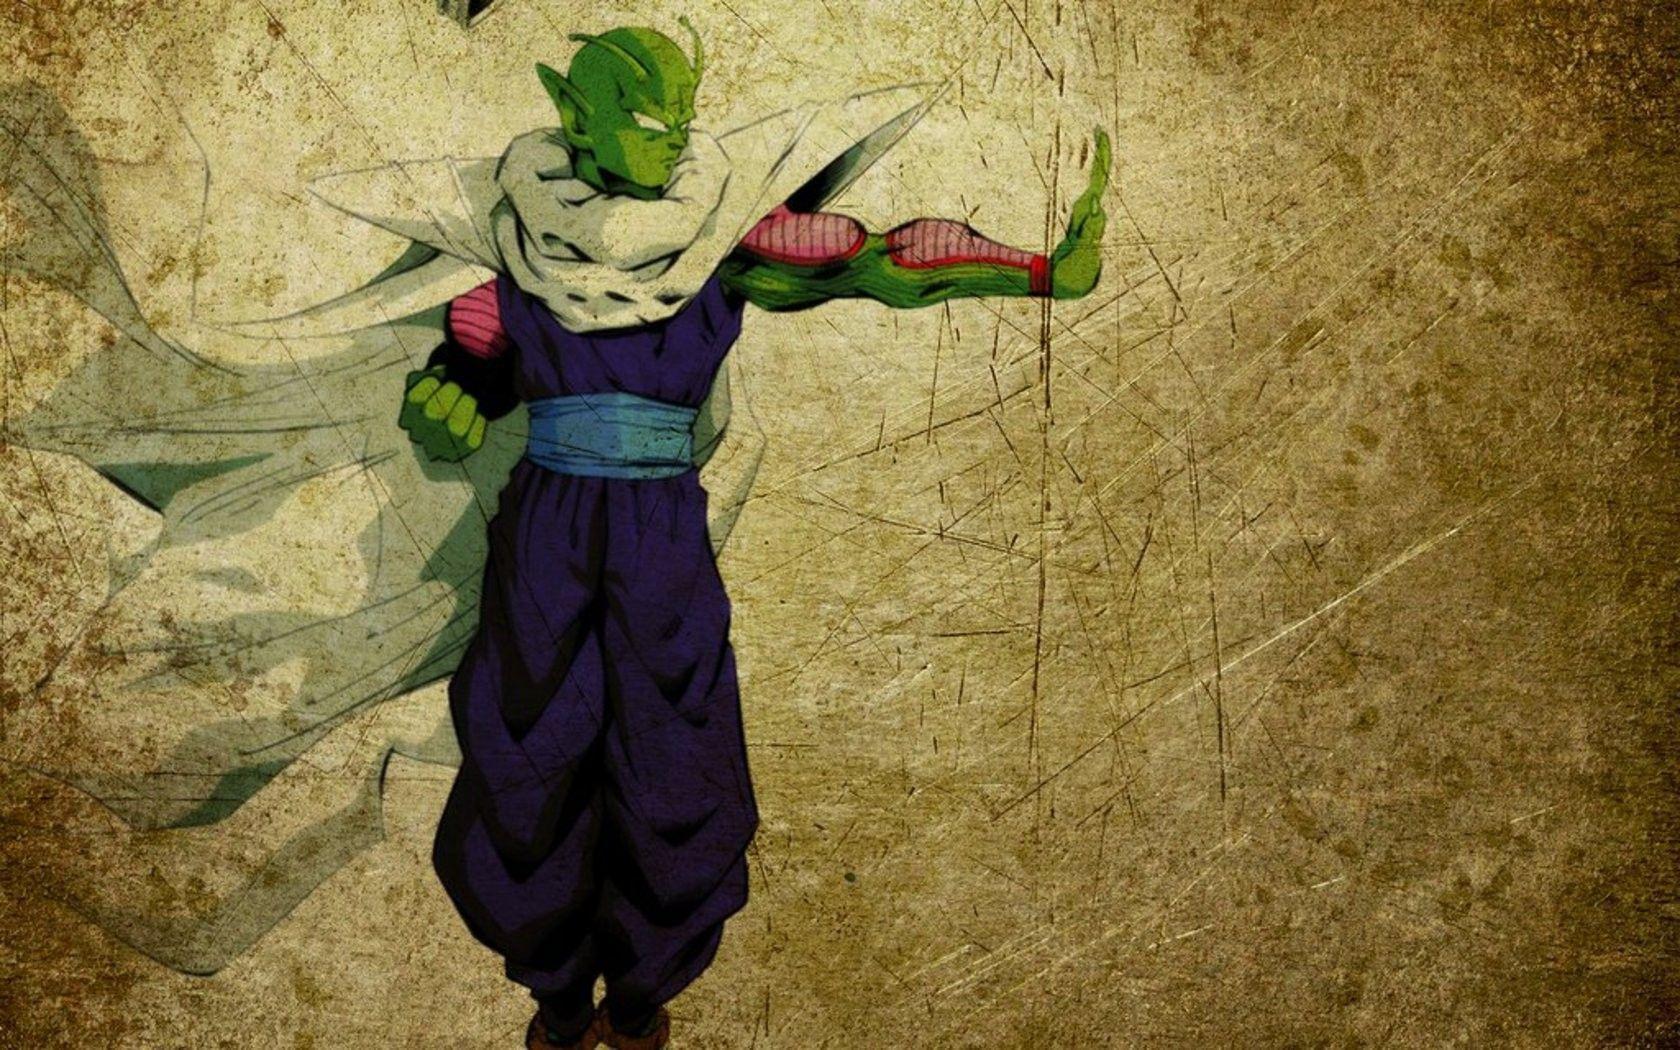 Piccolo Dbz Wallpapers Top Free Piccolo Dbz Backgrounds Wallpaperaccess